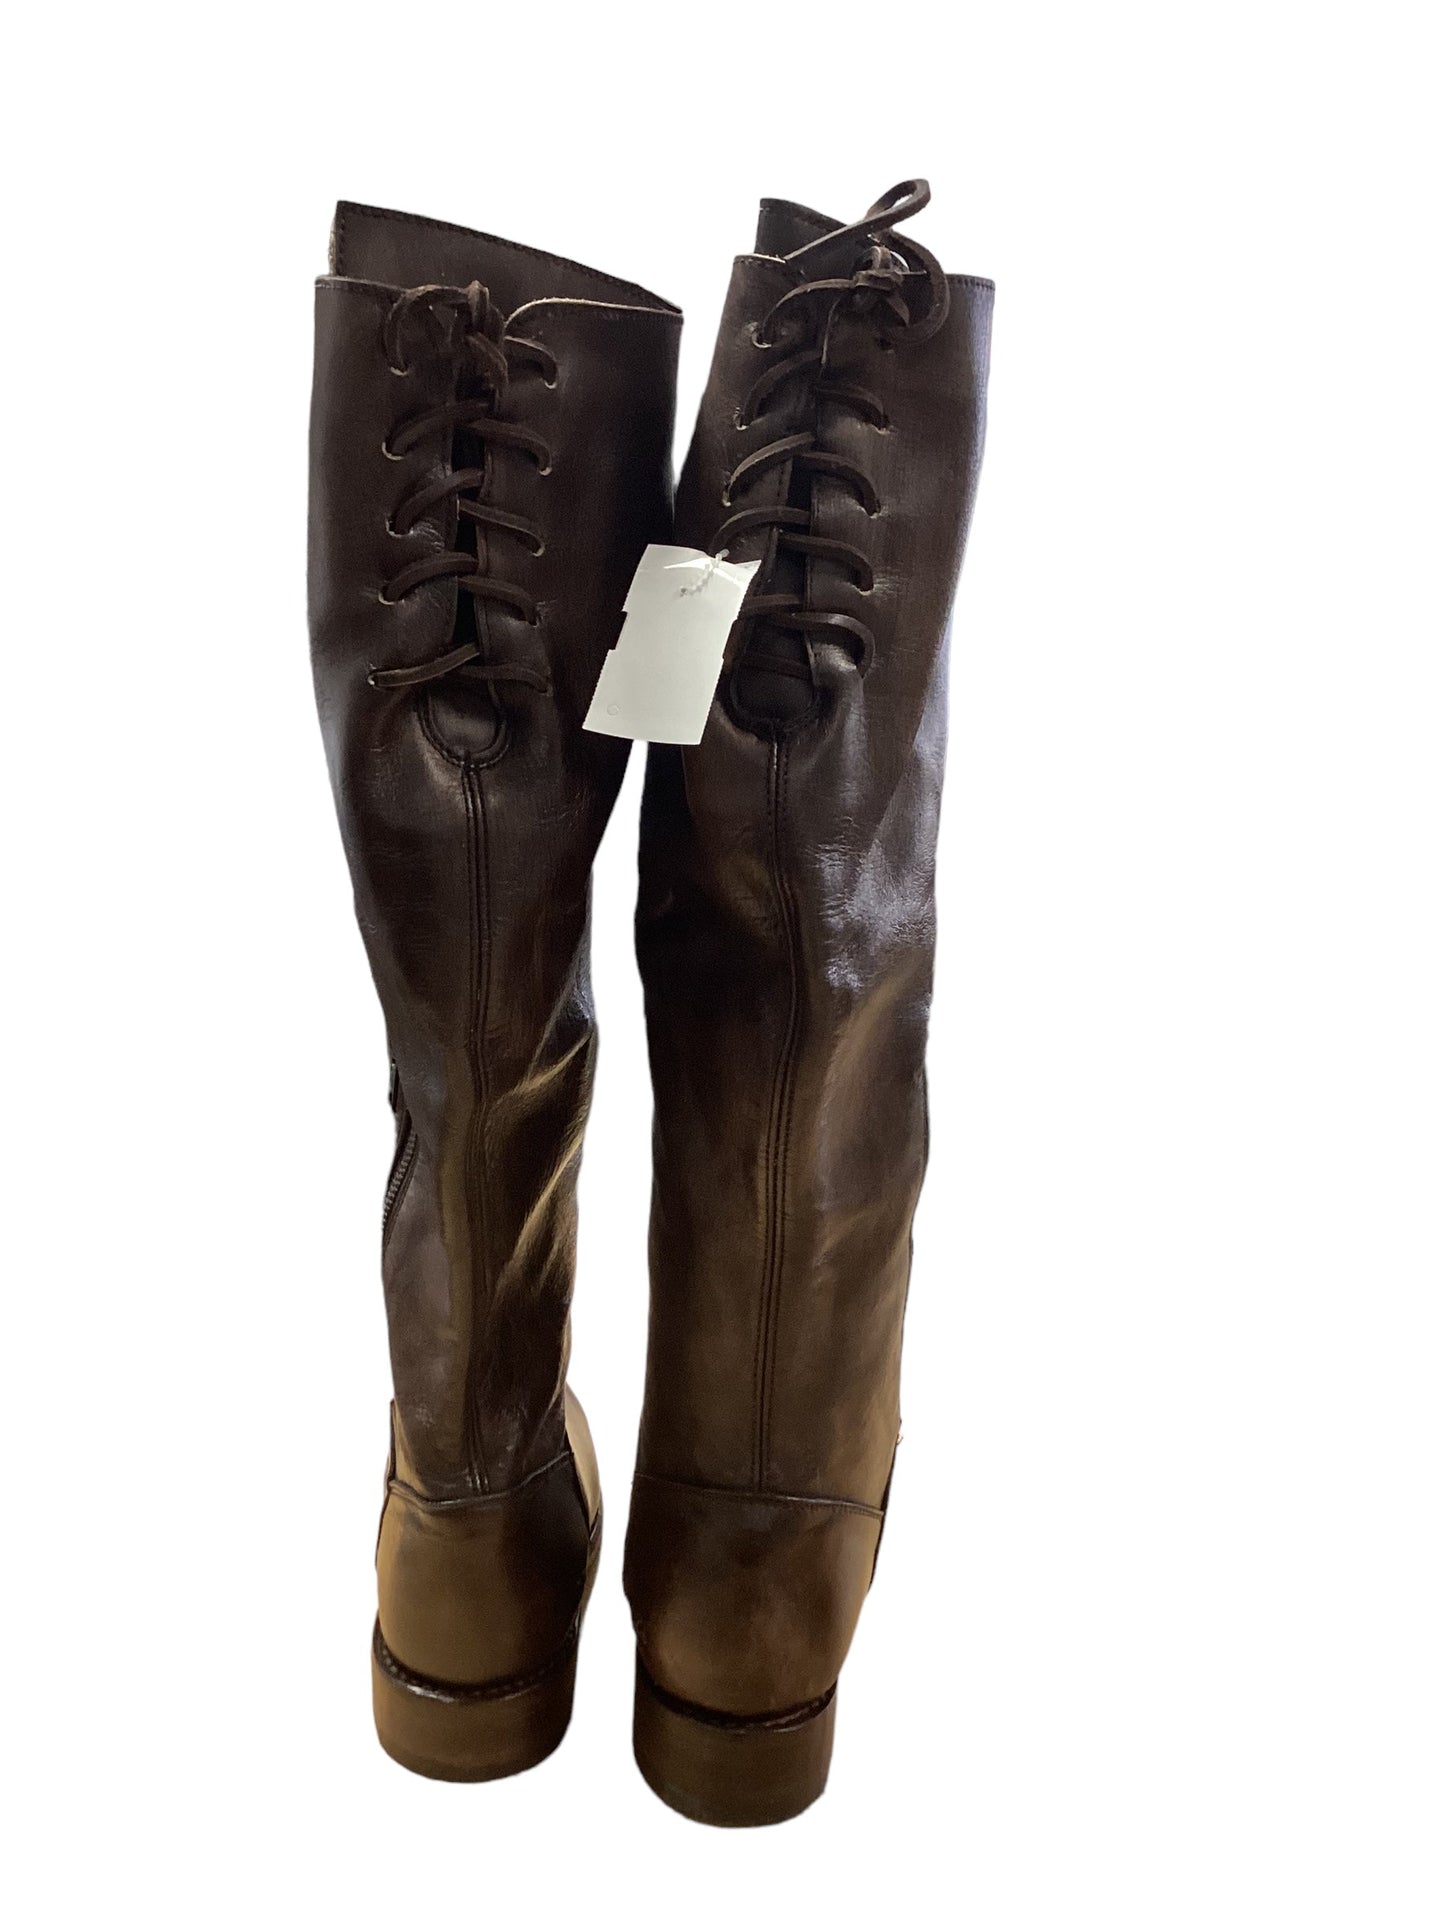 Boots Leather By Bed Stu  Size: 9